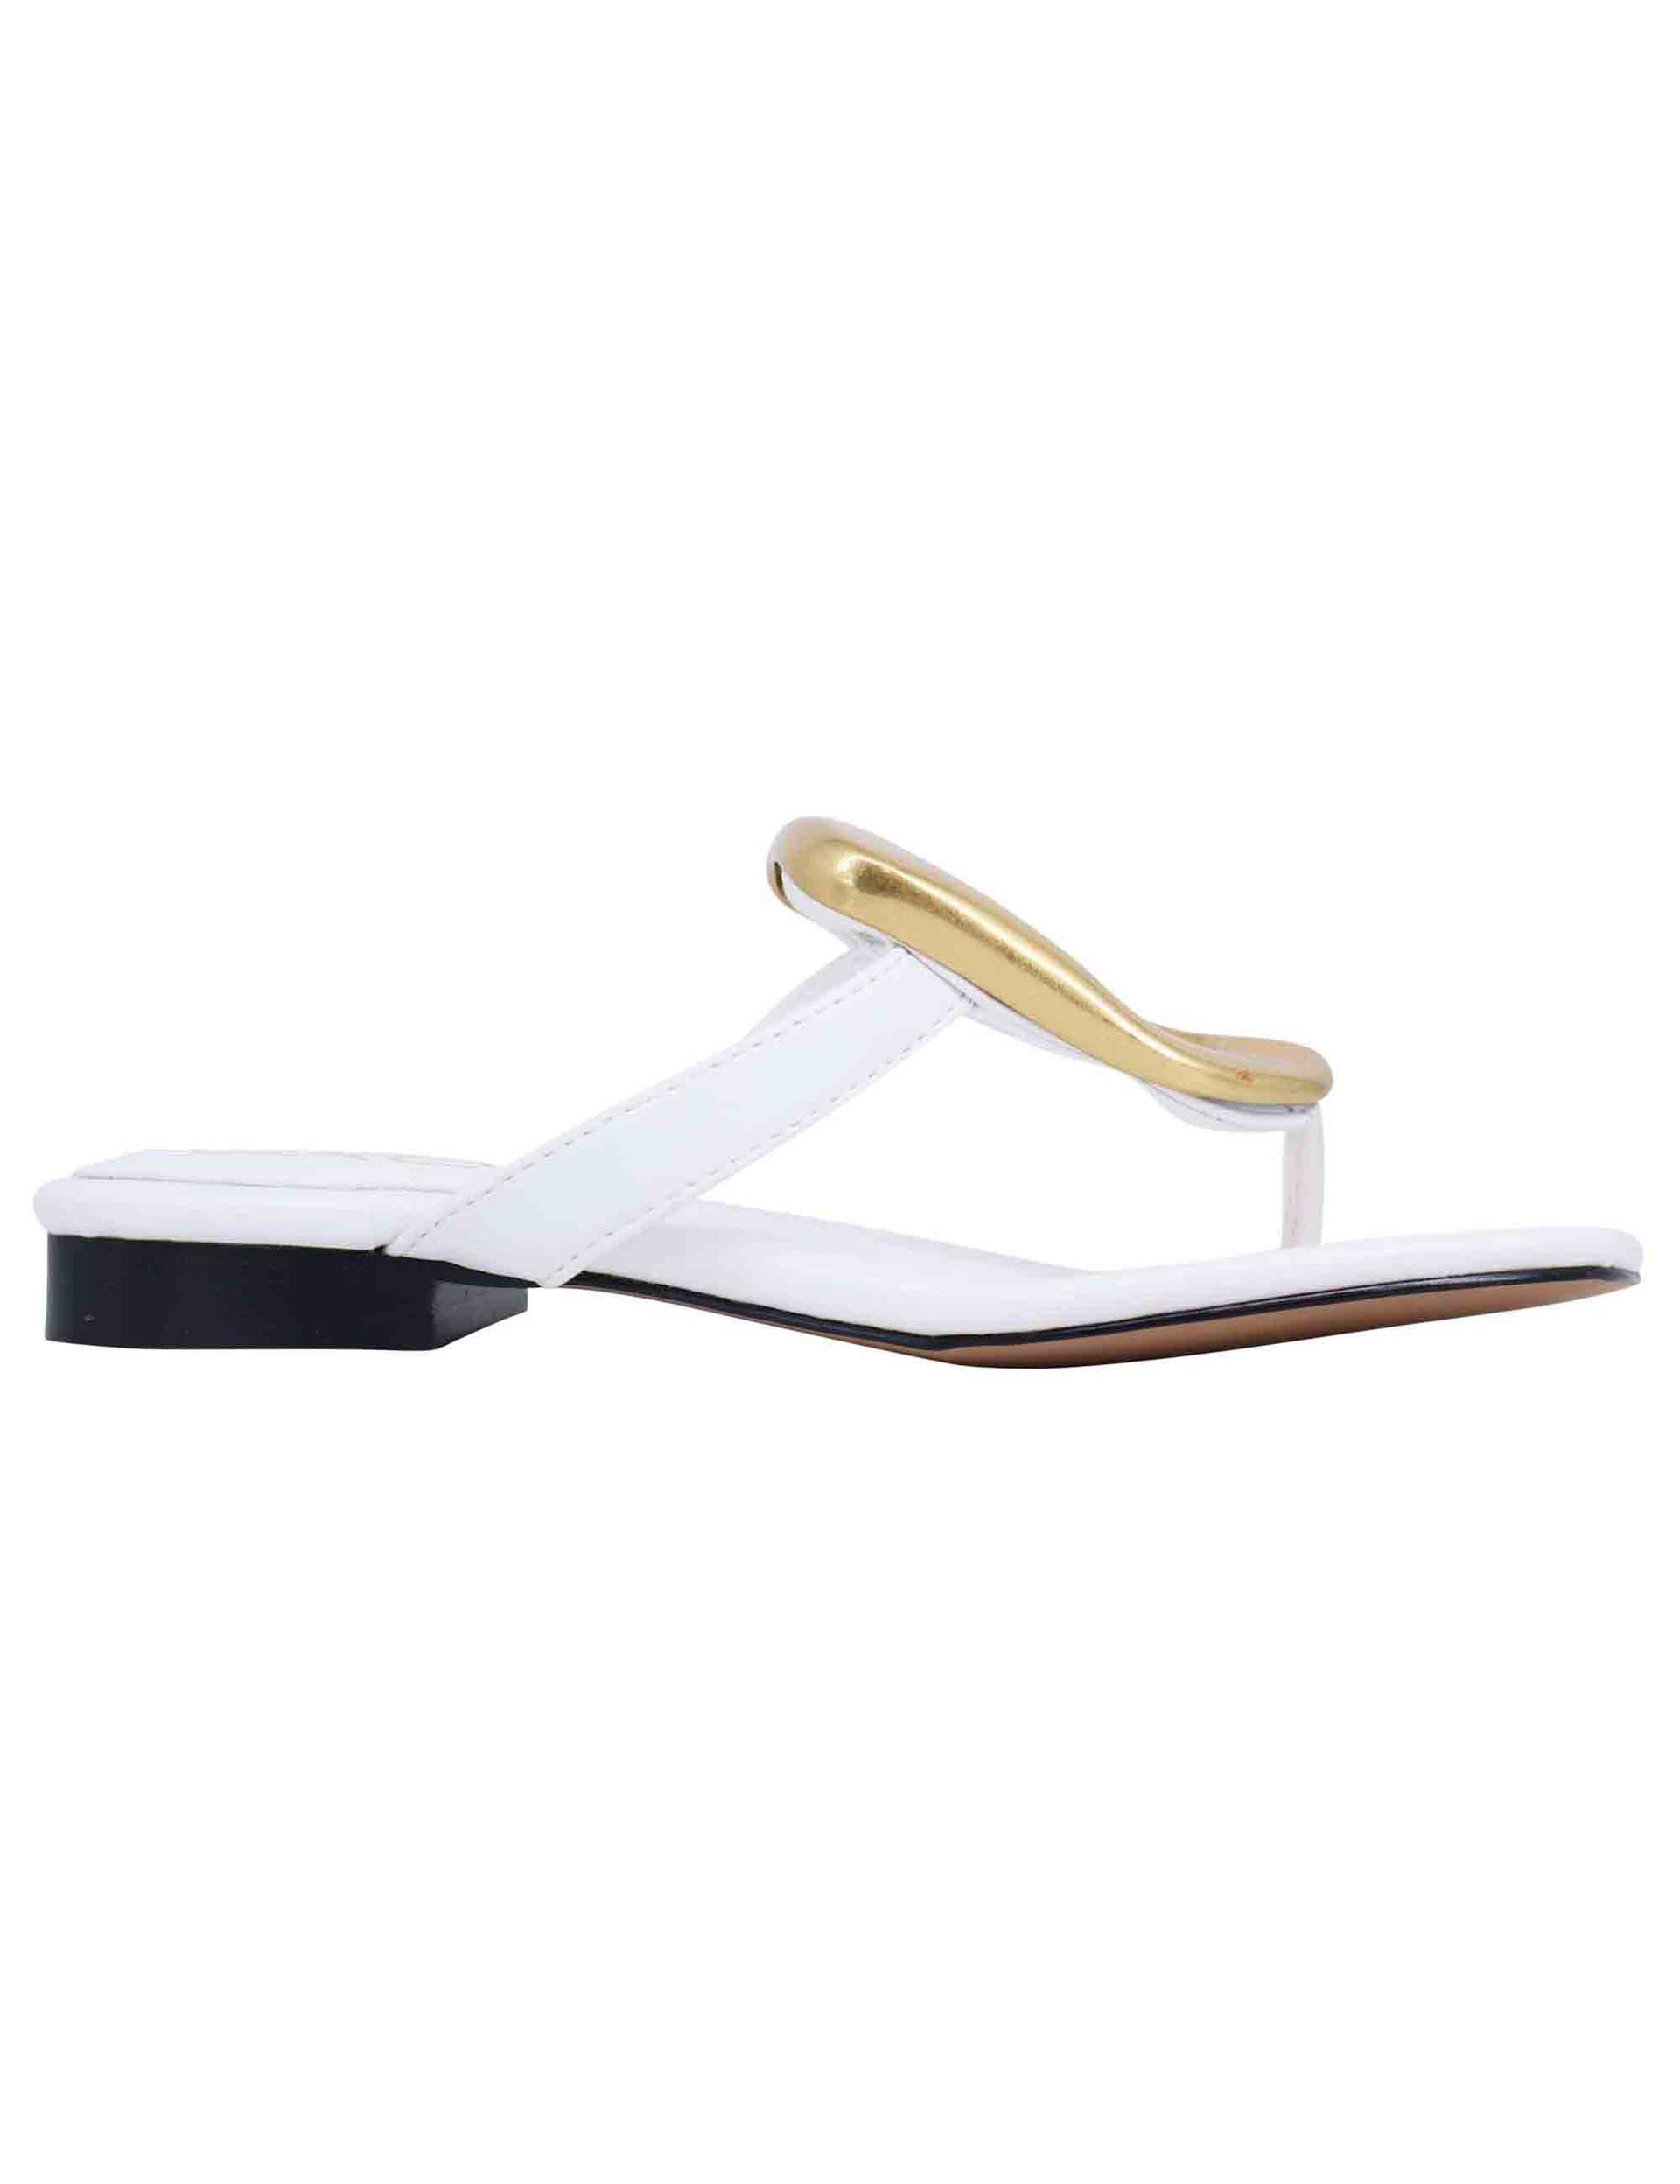 Women's white patent leather thong sandals with low heel and gold accessory